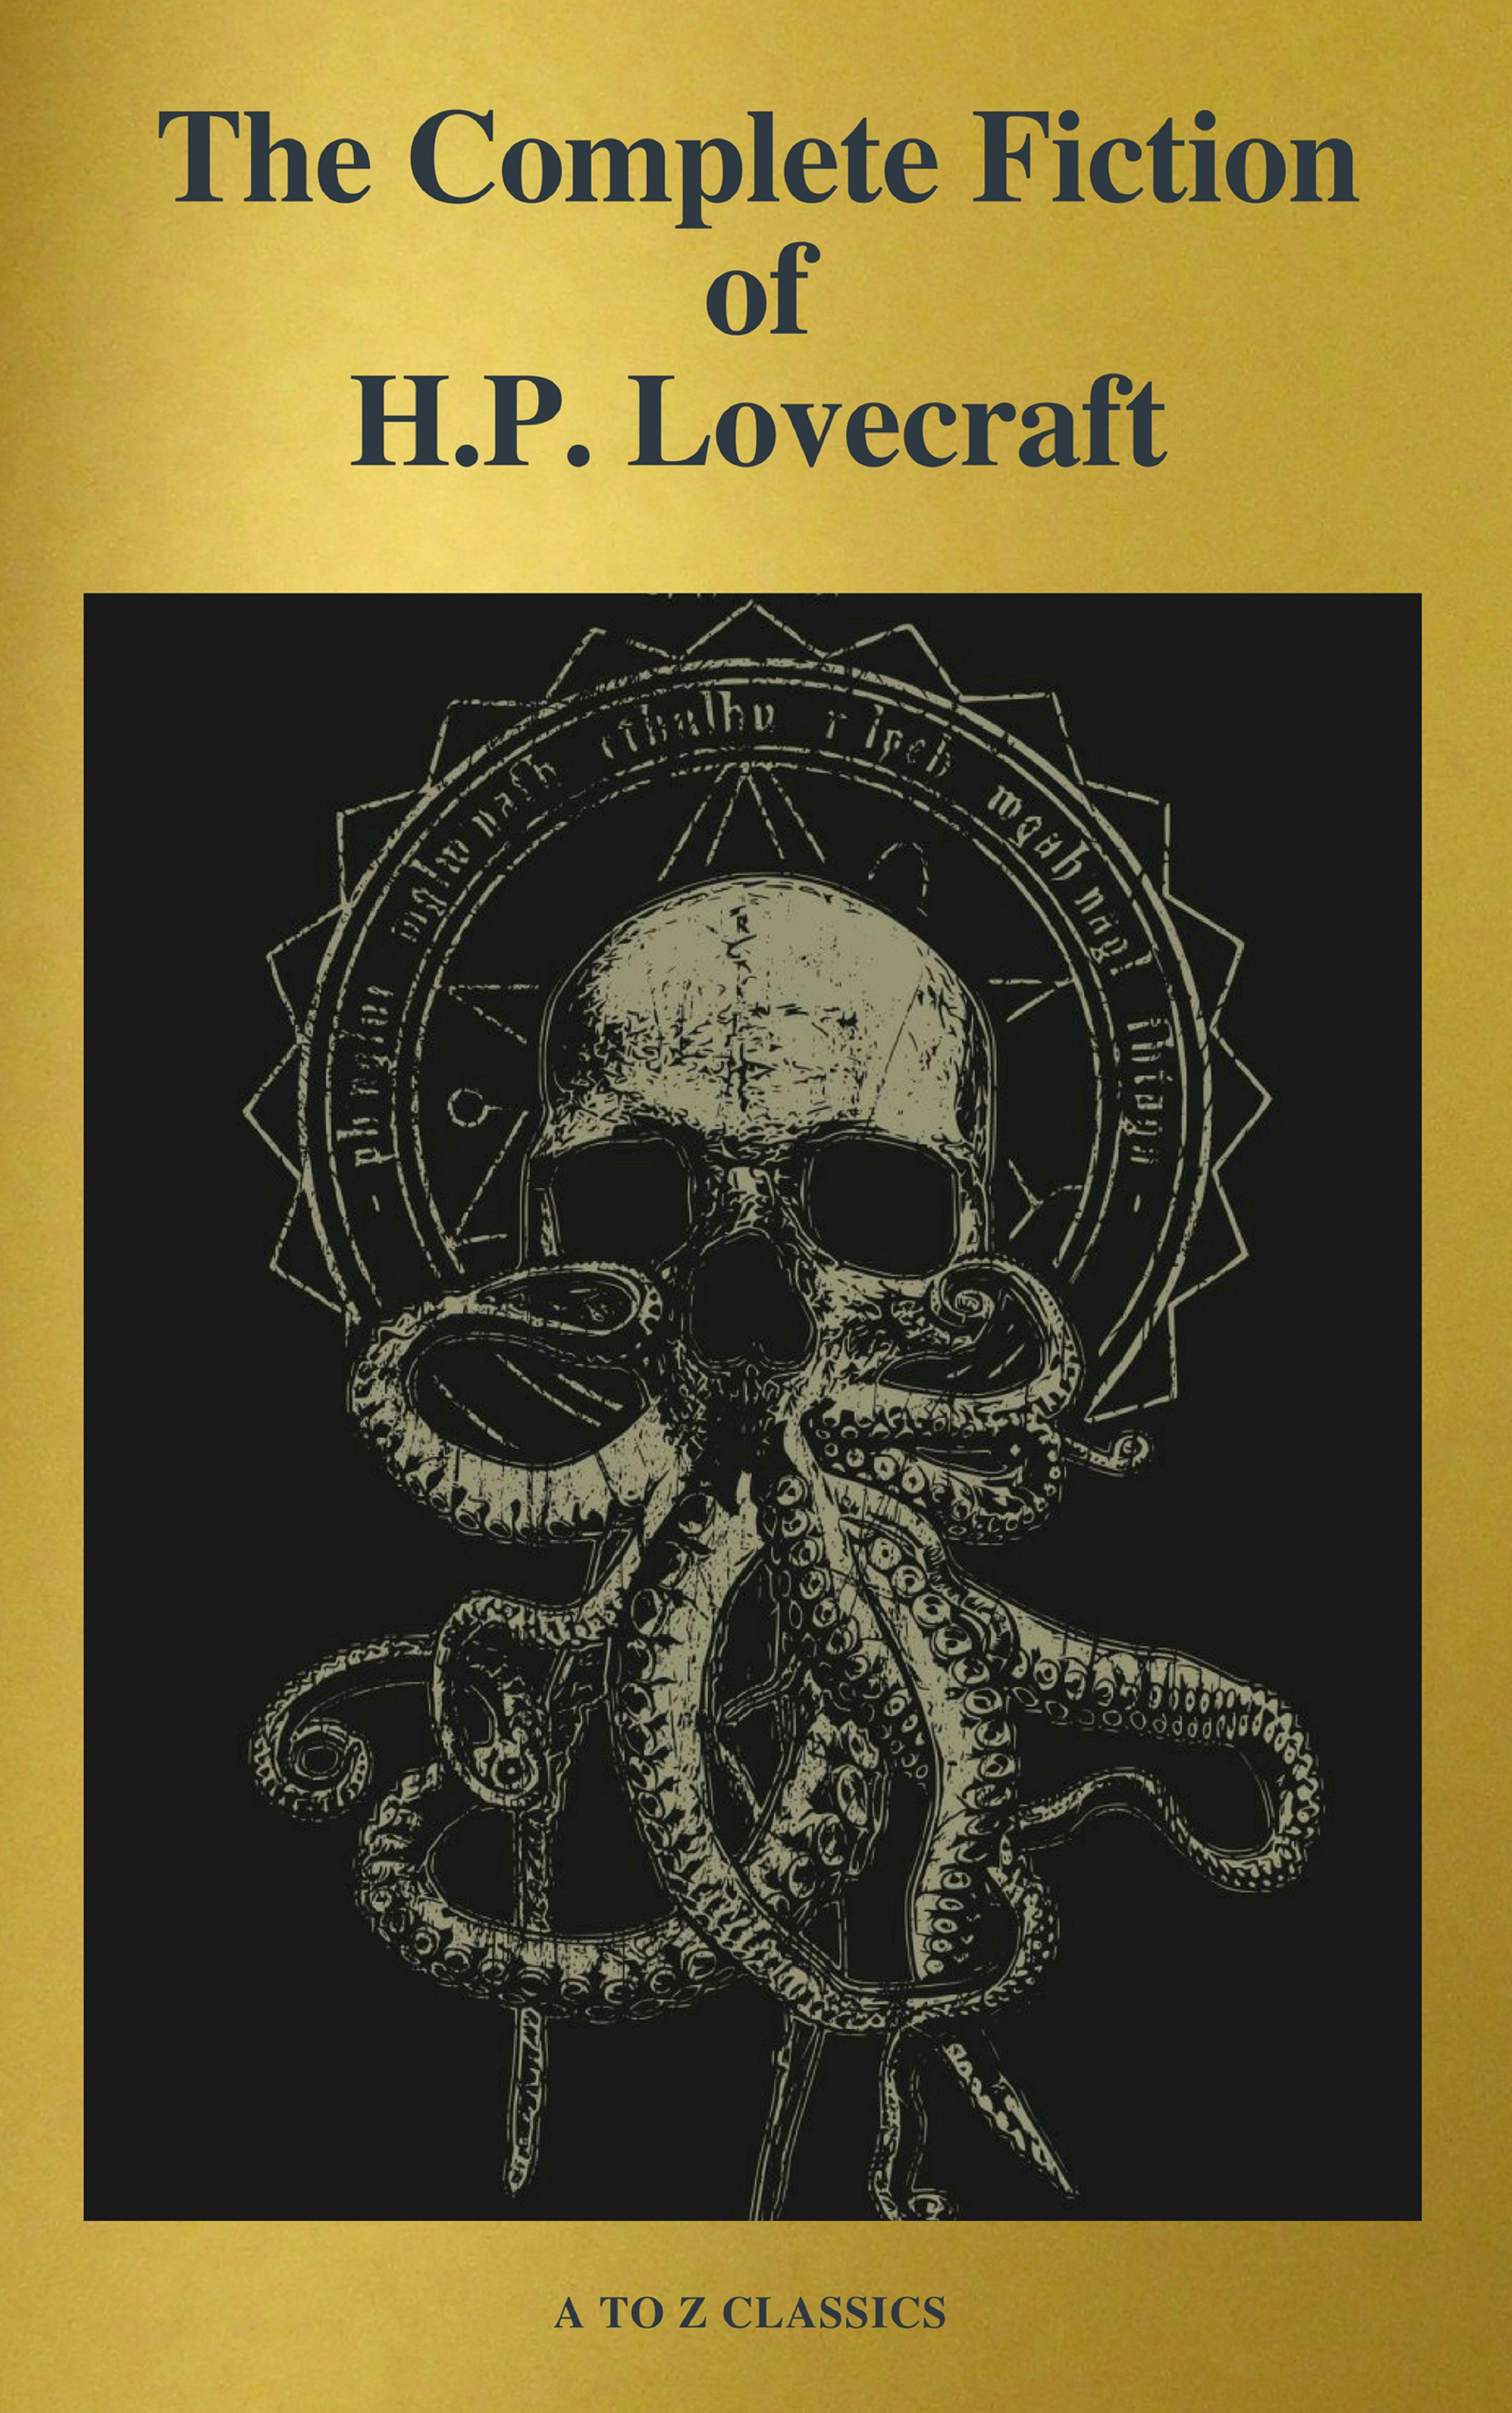 The Complete Fiction of H.P. Lovecraft ( A to Z Classics ) - A to ZClassics, H. P. Lovecraft